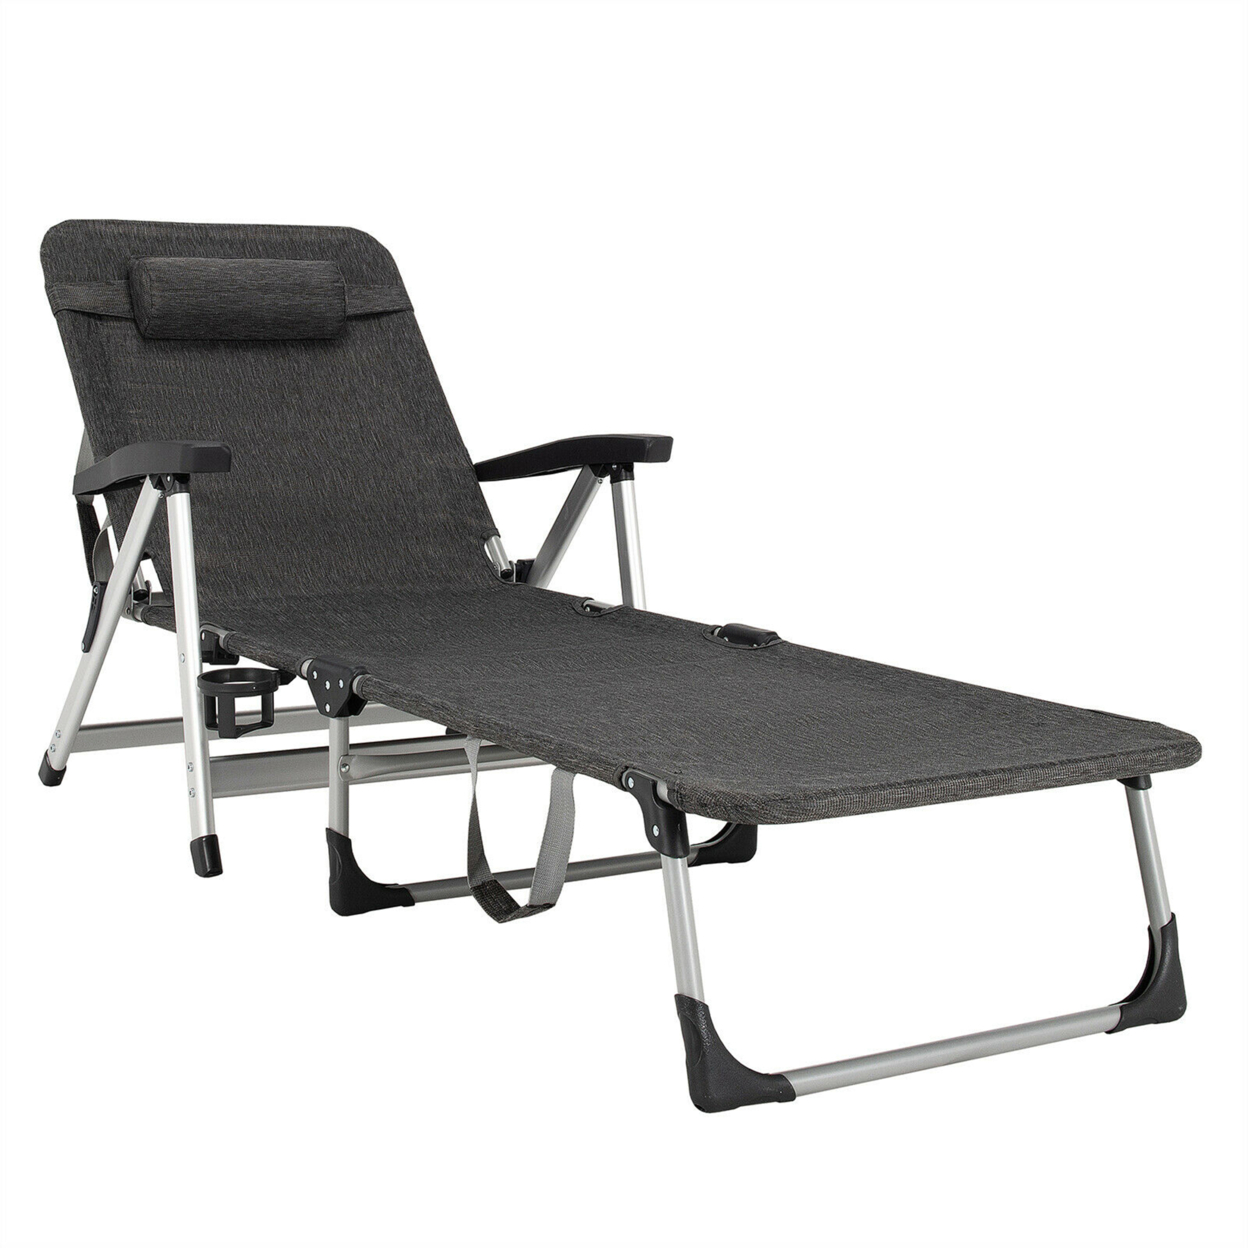 Beach Chaise Lounge Chair Patio Folding Recliner W/ 7 Adjustable Positions - Grey